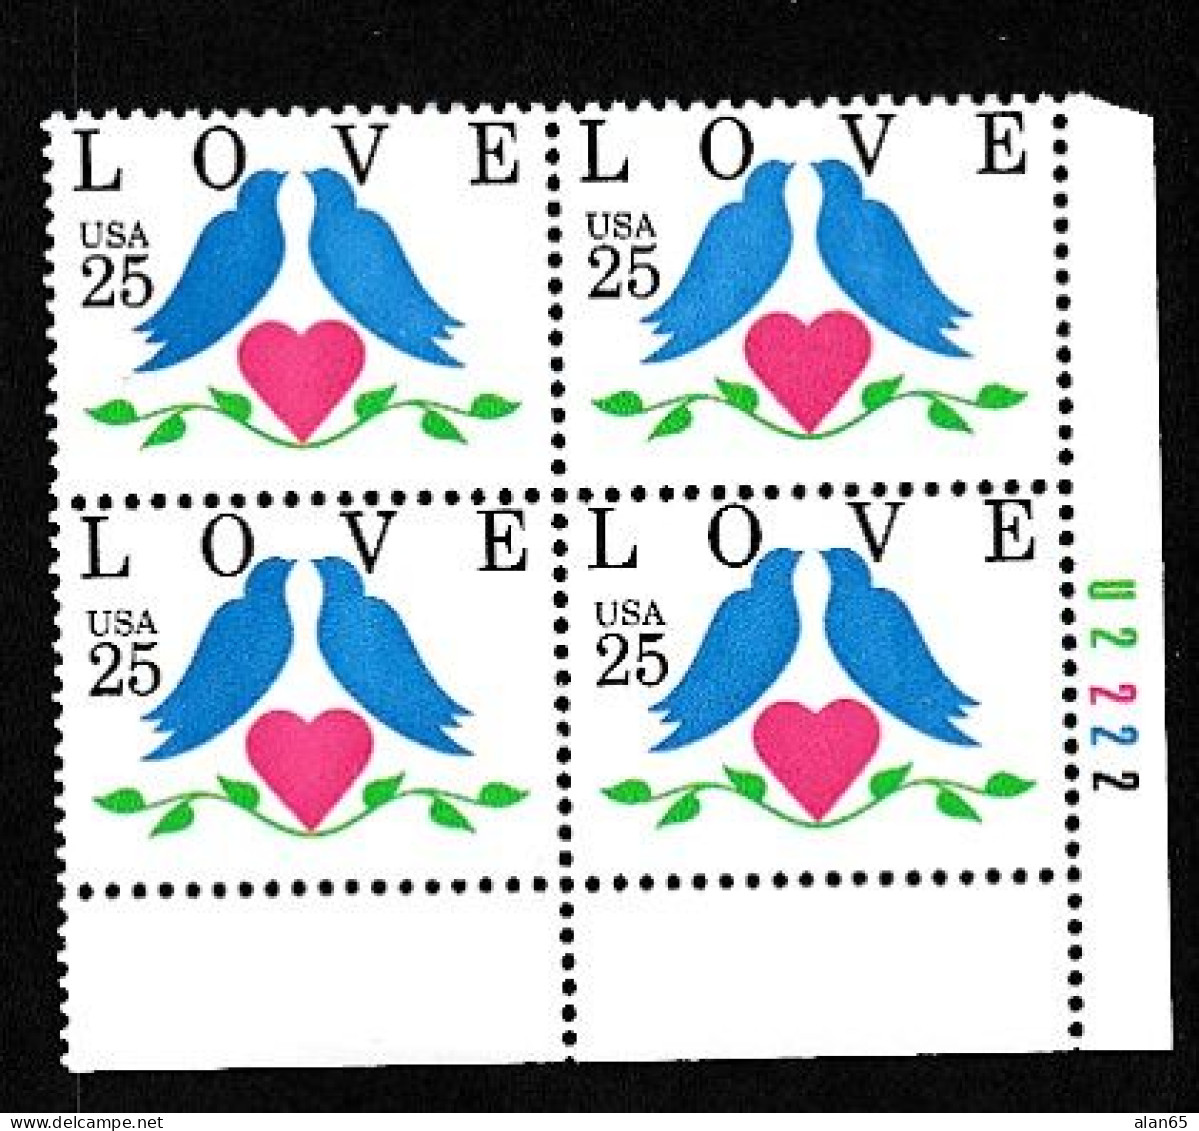 Sc#2440 'Love' Birds And Heart, 25-cent 1990 Issue, Plate # Block Of 4 MNH US Postage Stamps - Numéros De Planches